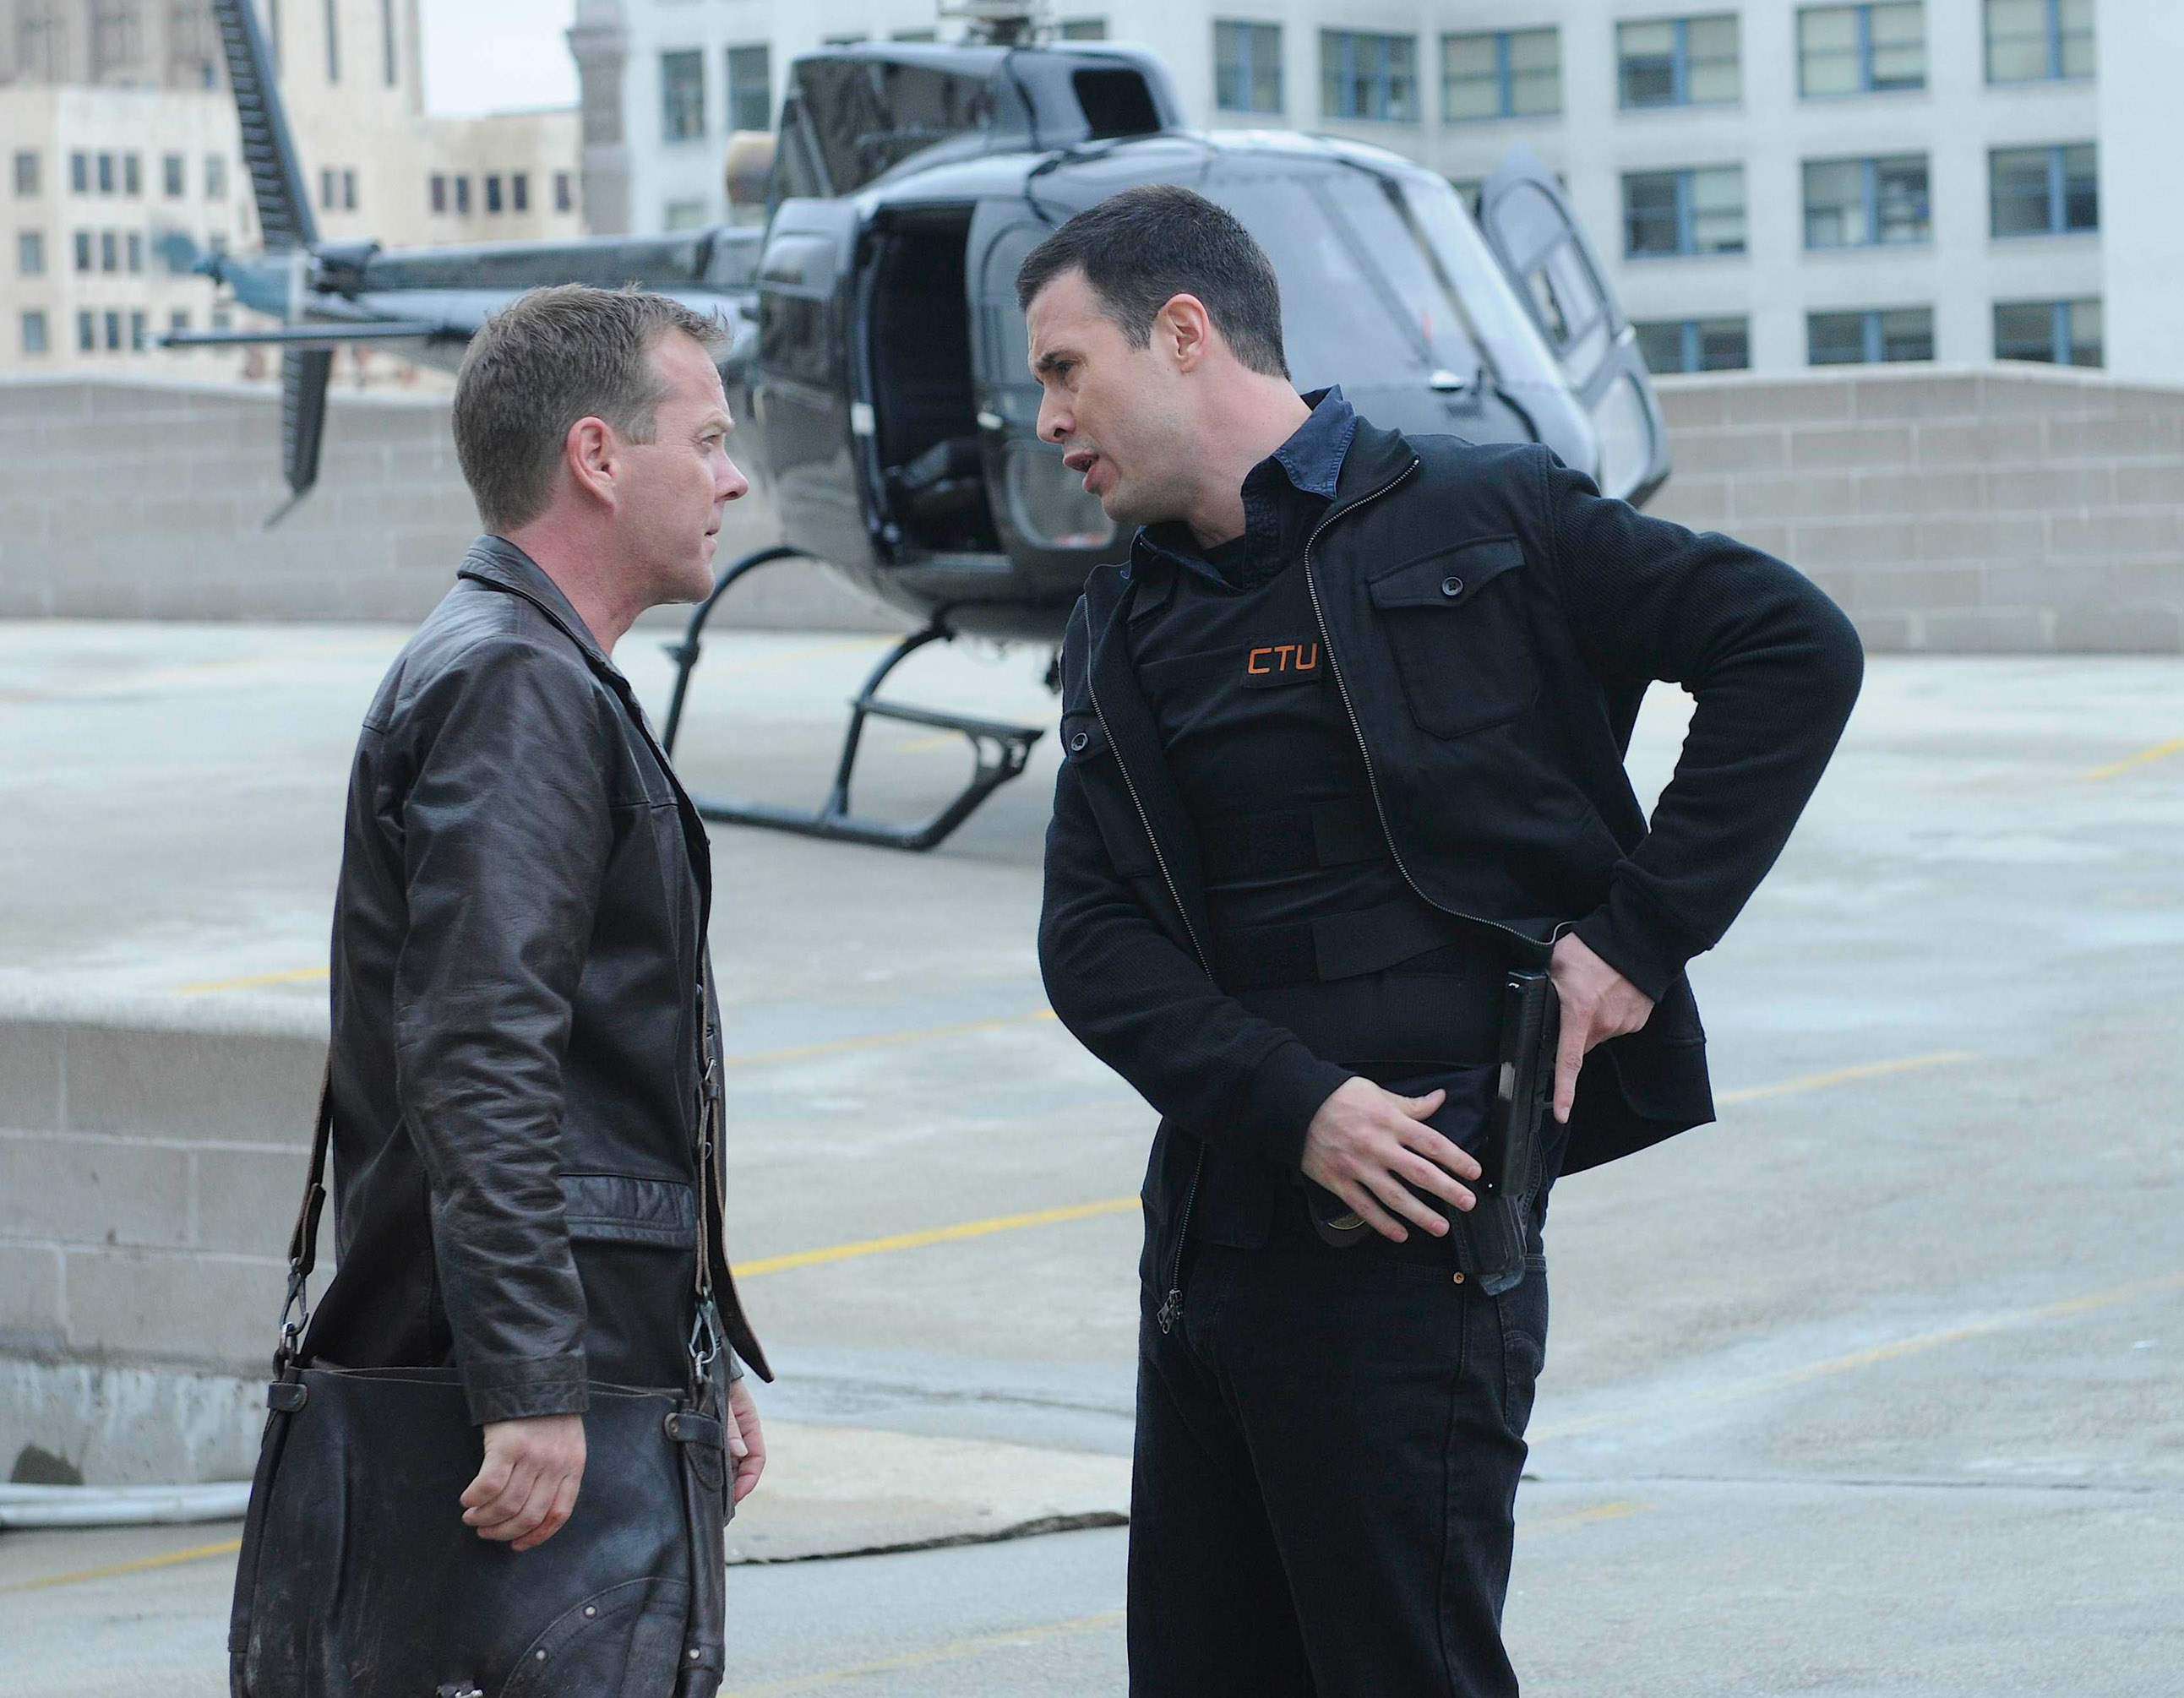 Kiefer Sutherland and Freddie Prinze Jr. in a scene from &quot;24,&quot; standing on a rooftop with a helicopter in the background. Sutherland wears a leather jacket